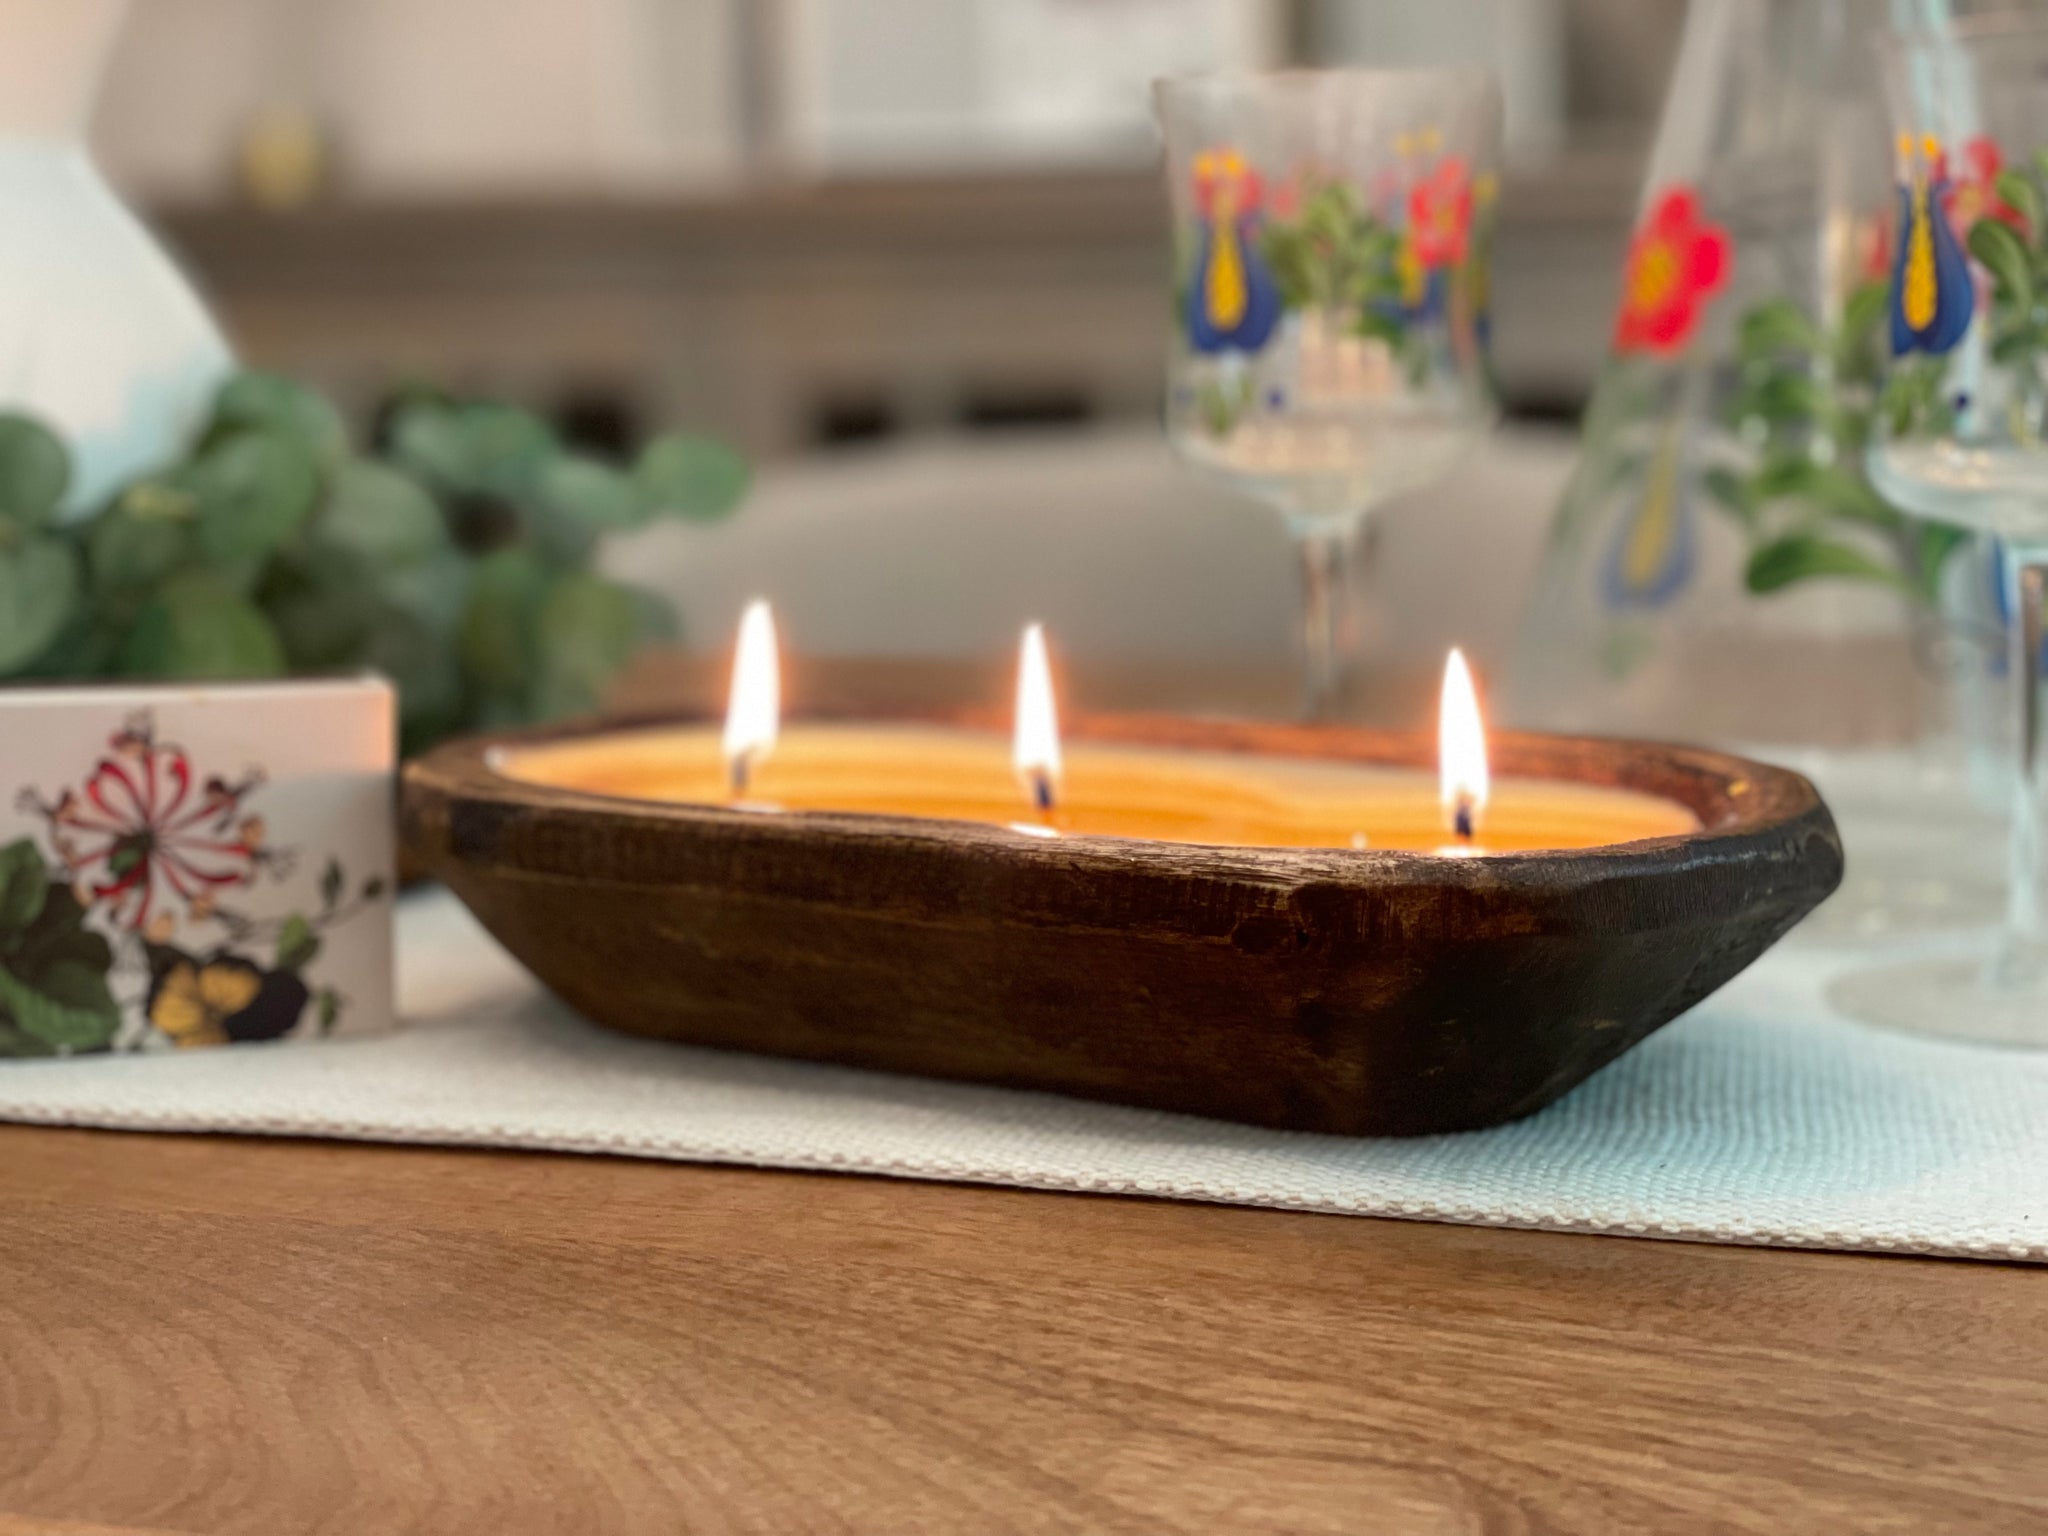 5-Wick Dough Bowl Soy Candle - Woodland Chateau